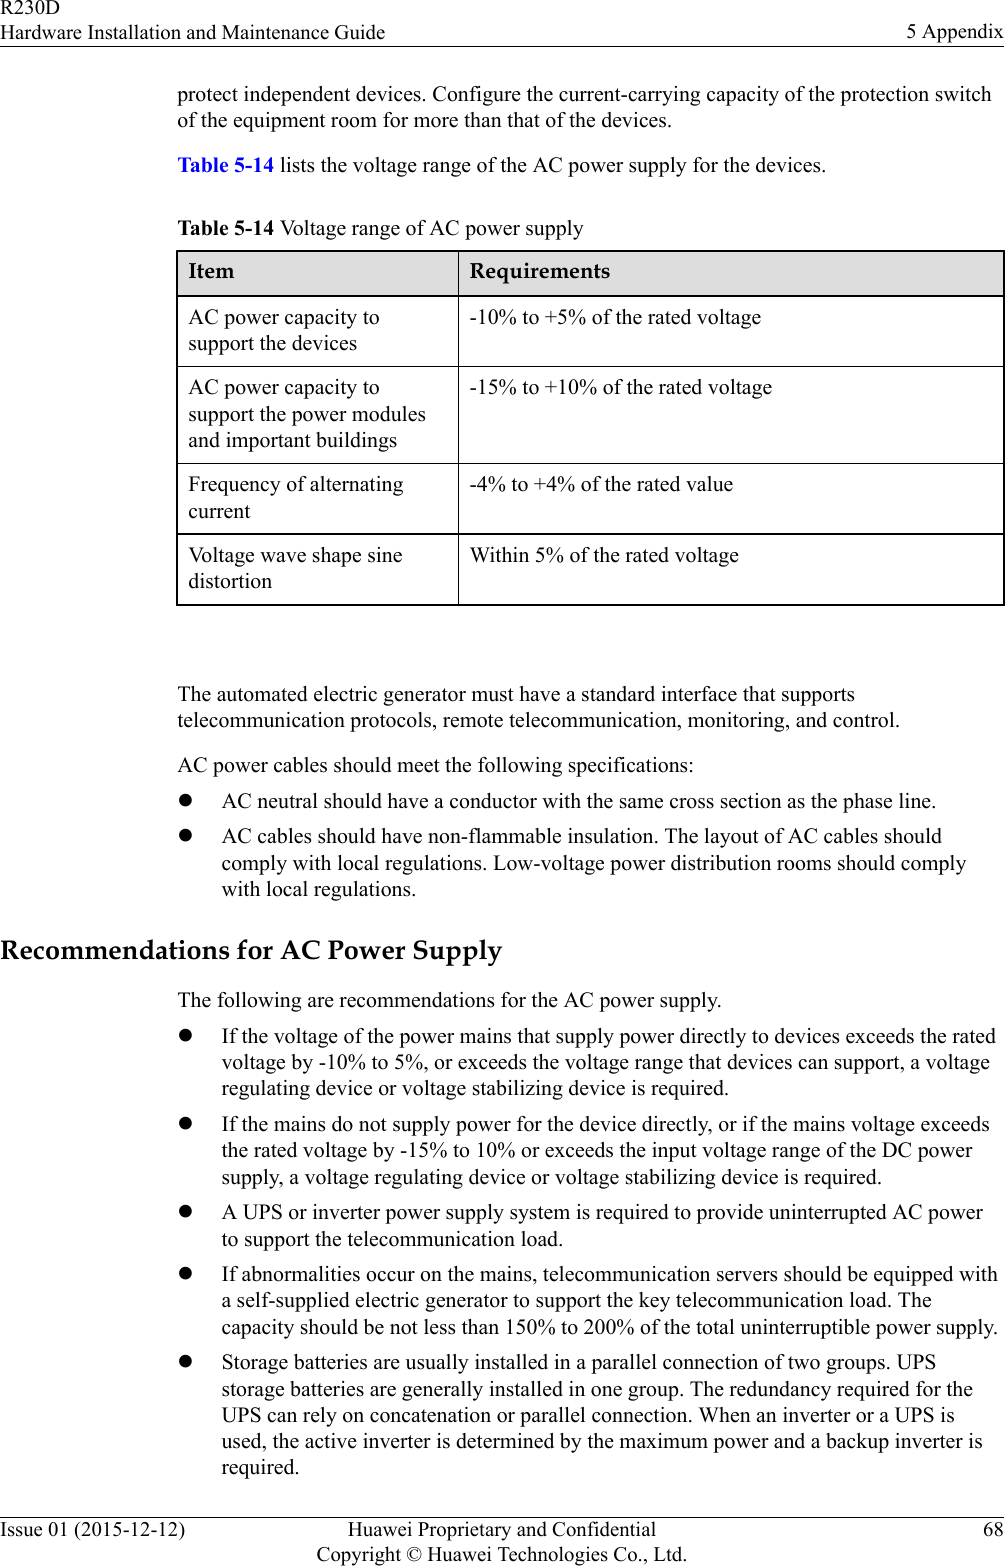 protect independent devices. Configure the current-carrying capacity of the protection switchof the equipment room for more than that of the devices.Table 5-14 lists the voltage range of the AC power supply for the devices.Table 5-14 Voltage range of AC power supplyItem RequirementsAC power capacity tosupport the devices-10% to +5% of the rated voltageAC power capacity tosupport the power modulesand important buildings-15% to +10% of the rated voltageFrequency of alternatingcurrent-4% to +4% of the rated valueVoltage wave shape sinedistortionWithin 5% of the rated voltage The automated electric generator must have a standard interface that supportstelecommunication protocols, remote telecommunication, monitoring, and control.AC power cables should meet the following specifications:lAC neutral should have a conductor with the same cross section as the phase line.lAC cables should have non-flammable insulation. The layout of AC cables shouldcomply with local regulations. Low-voltage power distribution rooms should complywith local regulations.Recommendations for AC Power SupplyThe following are recommendations for the AC power supply.lIf the voltage of the power mains that supply power directly to devices exceeds the ratedvoltage by -10% to 5%, or exceeds the voltage range that devices can support, a voltageregulating device or voltage stabilizing device is required.lIf the mains do not supply power for the device directly, or if the mains voltage exceedsthe rated voltage by -15% to 10% or exceeds the input voltage range of the DC powersupply, a voltage regulating device or voltage stabilizing device is required.lA UPS or inverter power supply system is required to provide uninterrupted AC powerto support the telecommunication load.lIf abnormalities occur on the mains, telecommunication servers should be equipped witha self-supplied electric generator to support the key telecommunication load. Thecapacity should be not less than 150% to 200% of the total uninterruptible power supply.lStorage batteries are usually installed in a parallel connection of two groups. UPSstorage batteries are generally installed in one group. The redundancy required for theUPS can rely on concatenation or parallel connection. When an inverter or a UPS isused, the active inverter is determined by the maximum power and a backup inverter isrequired.R230DHardware Installation and Maintenance Guide 5 AppendixIssue 01 (2015-12-12) Huawei Proprietary and ConfidentialCopyright © Huawei Technologies Co., Ltd.68